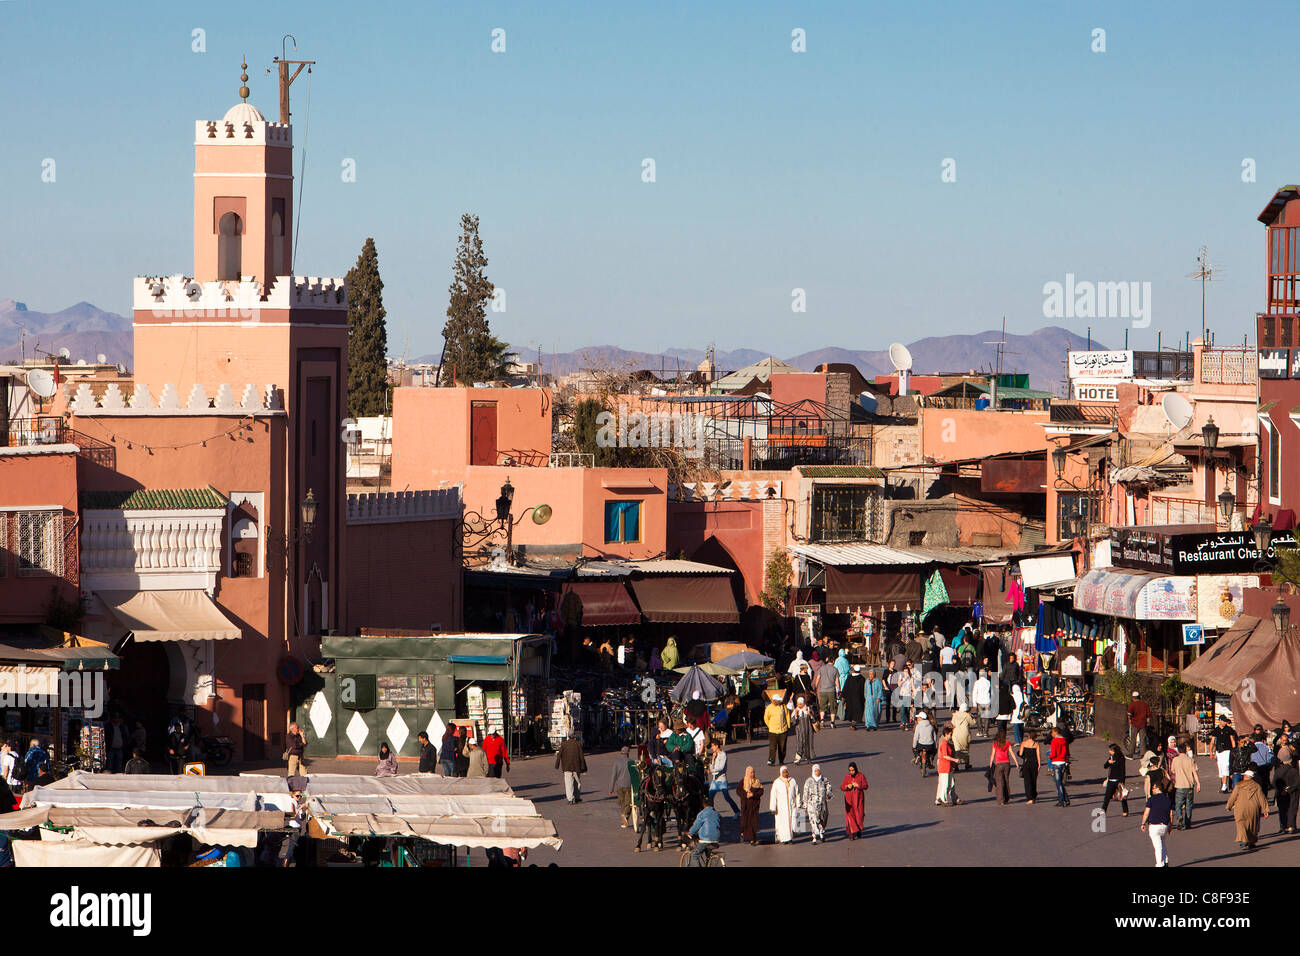 Morocco, North Africa, Africa, Marrakech, Medina, business, trade, shop, Djemaa el Fna, place, Stock Photo